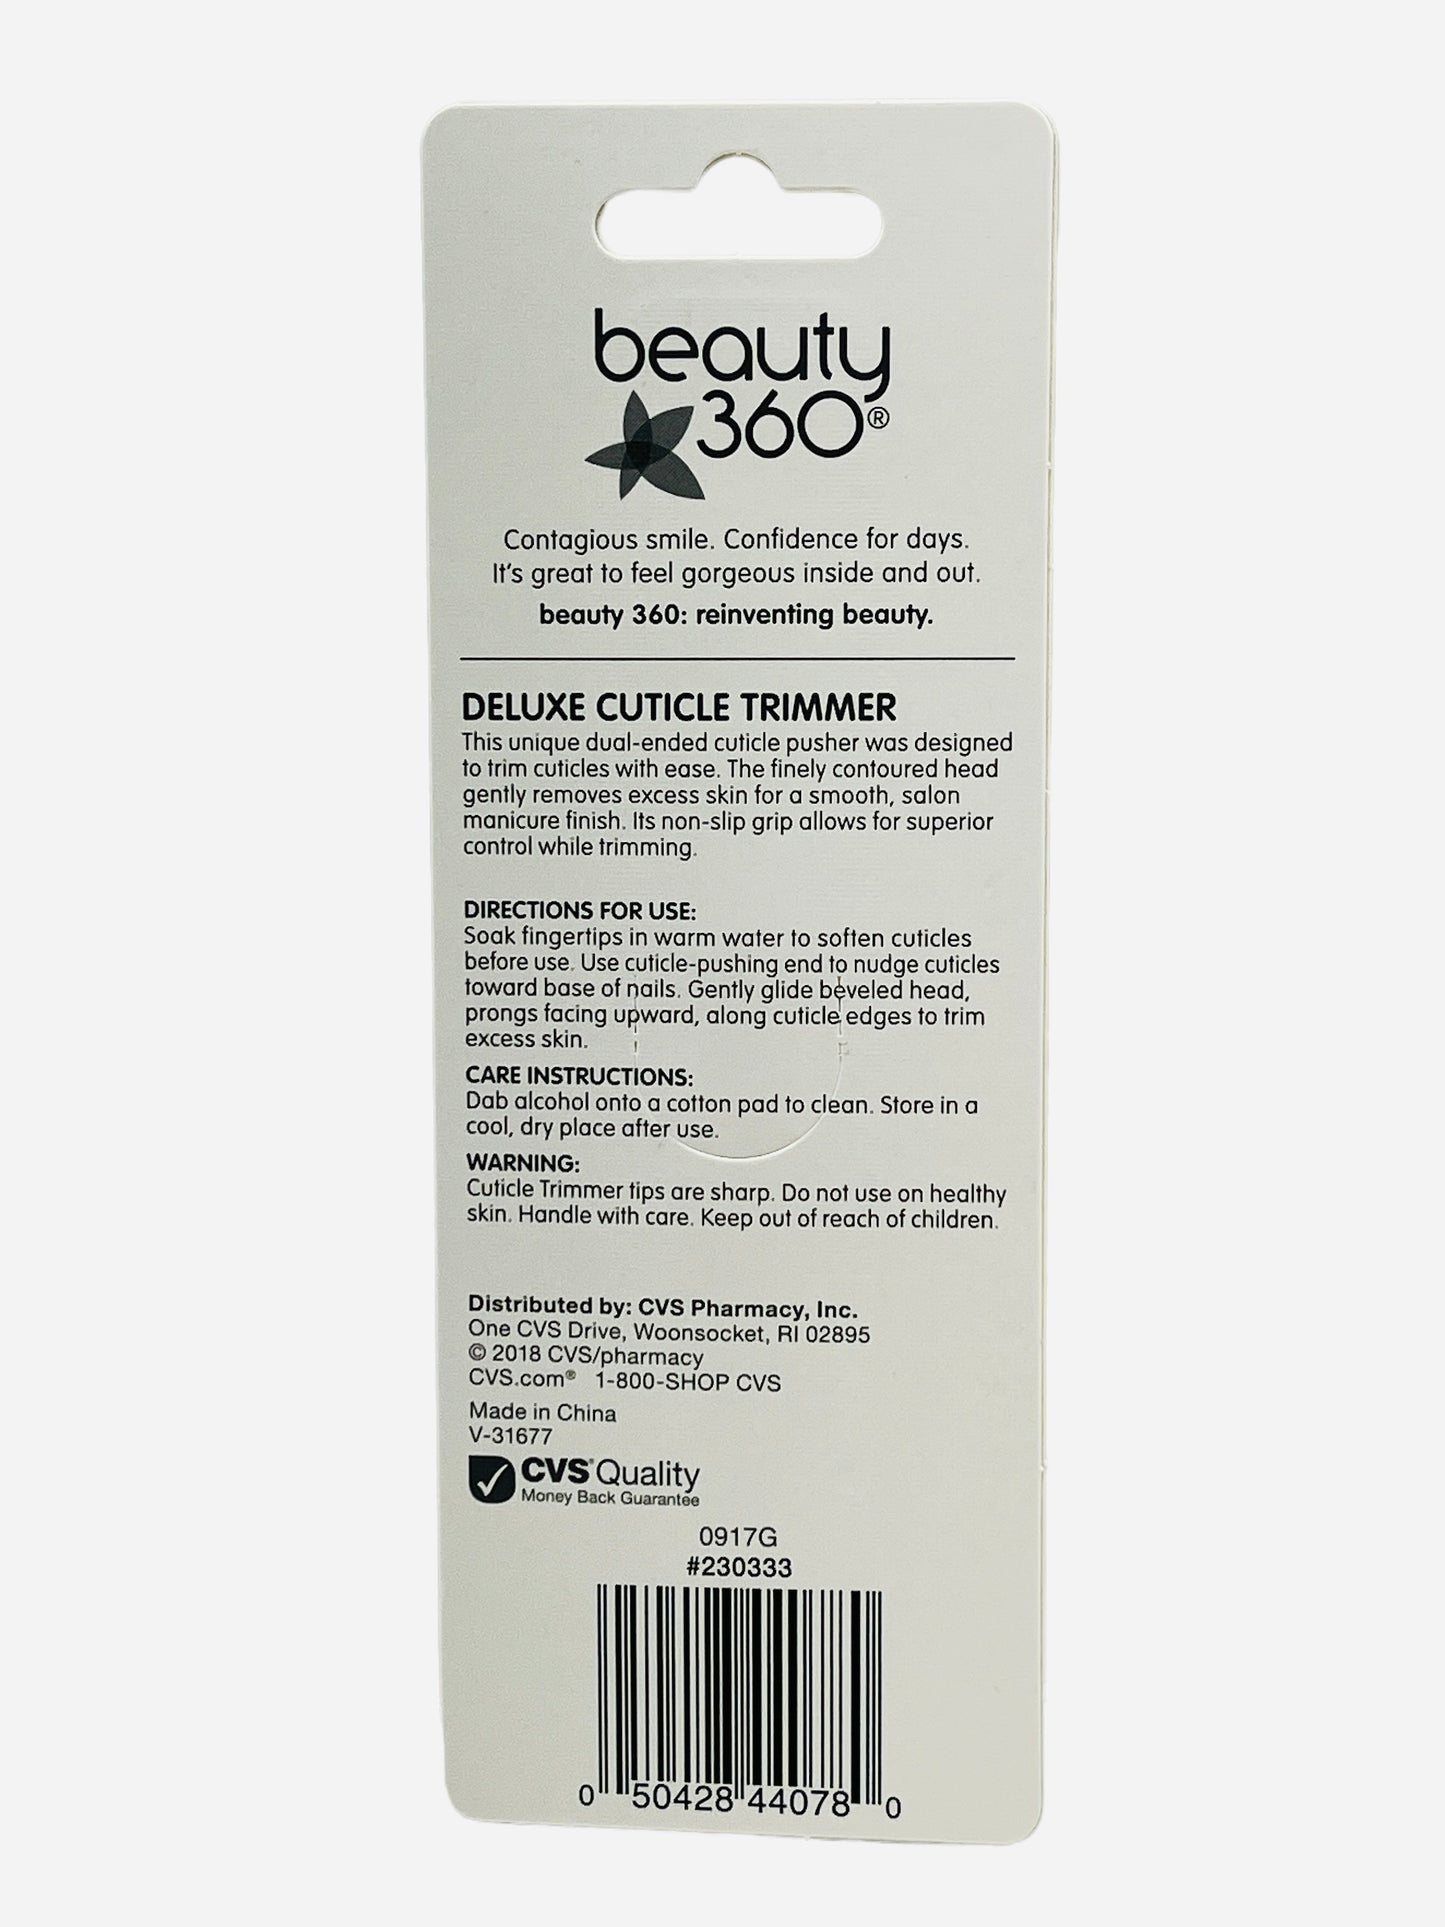 Beauty 360 Deluxe Cuticle Trimmer